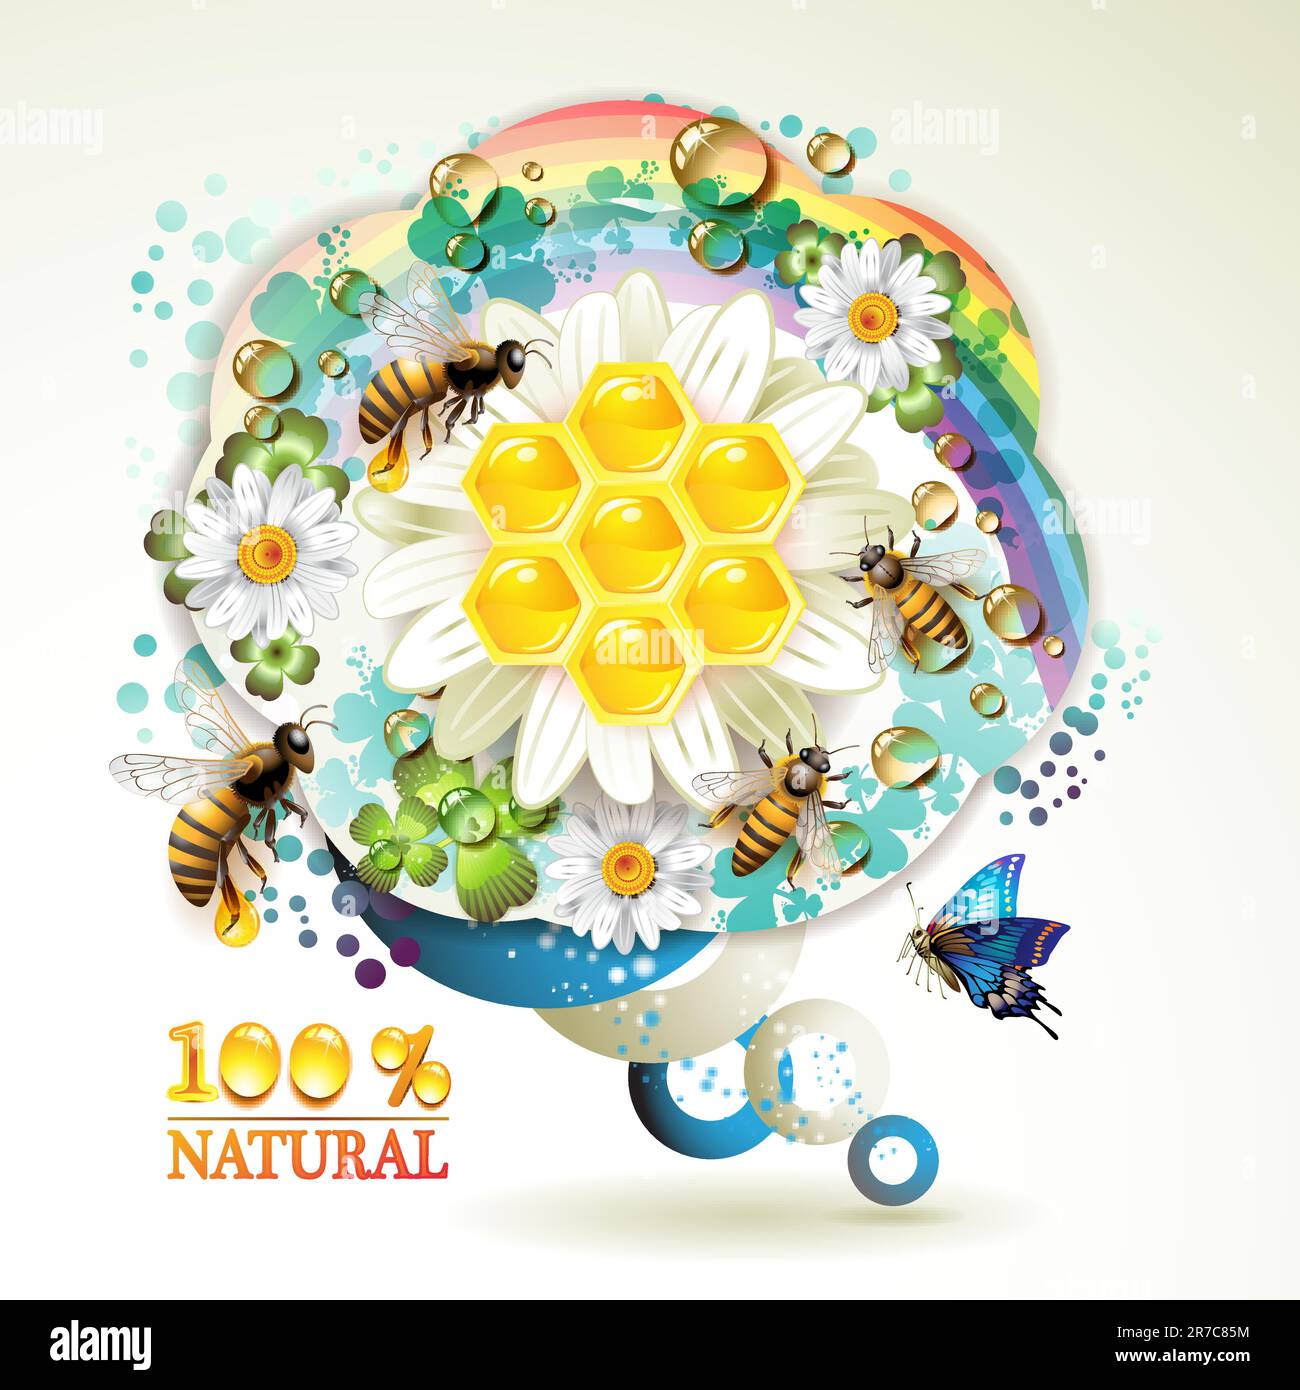 Bees and honeycombs over floral background with rainbow and drops of water Stock Vector